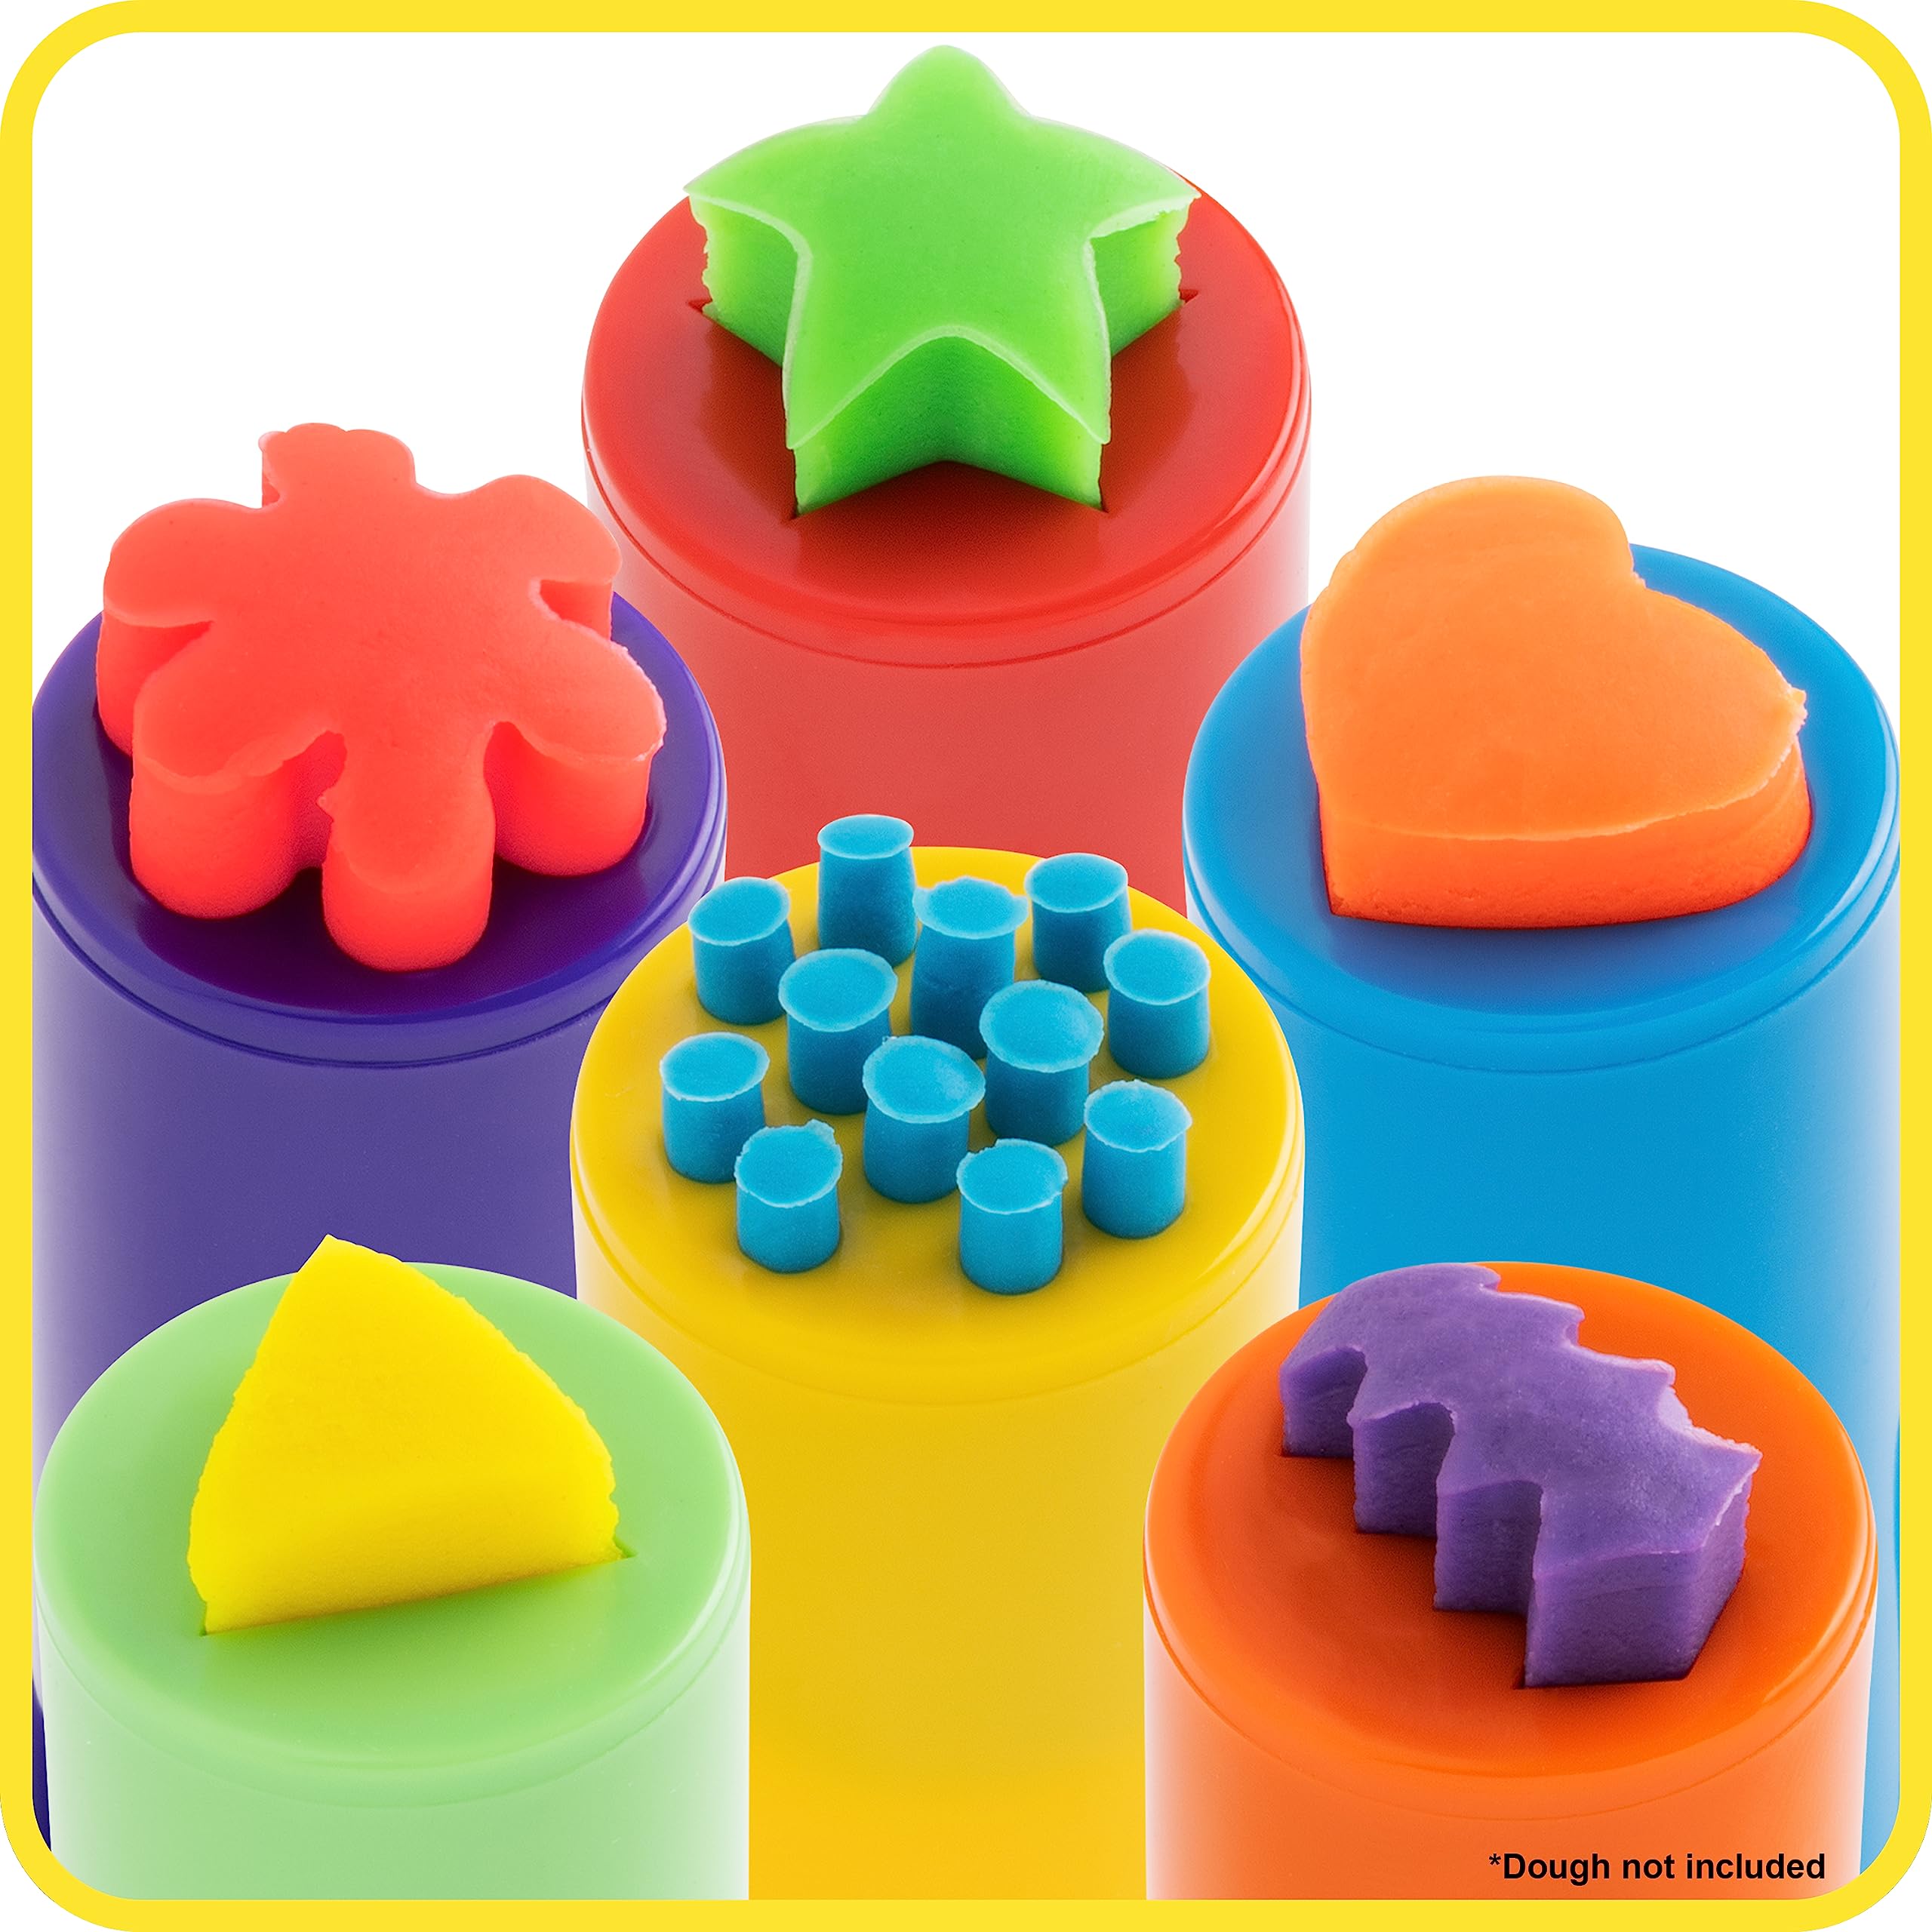 READY 2 LEARN Dough Extruders - Set of 6 - Play Dough Tools - for Ages 2+ - Art Accessories for Pottery and Dough